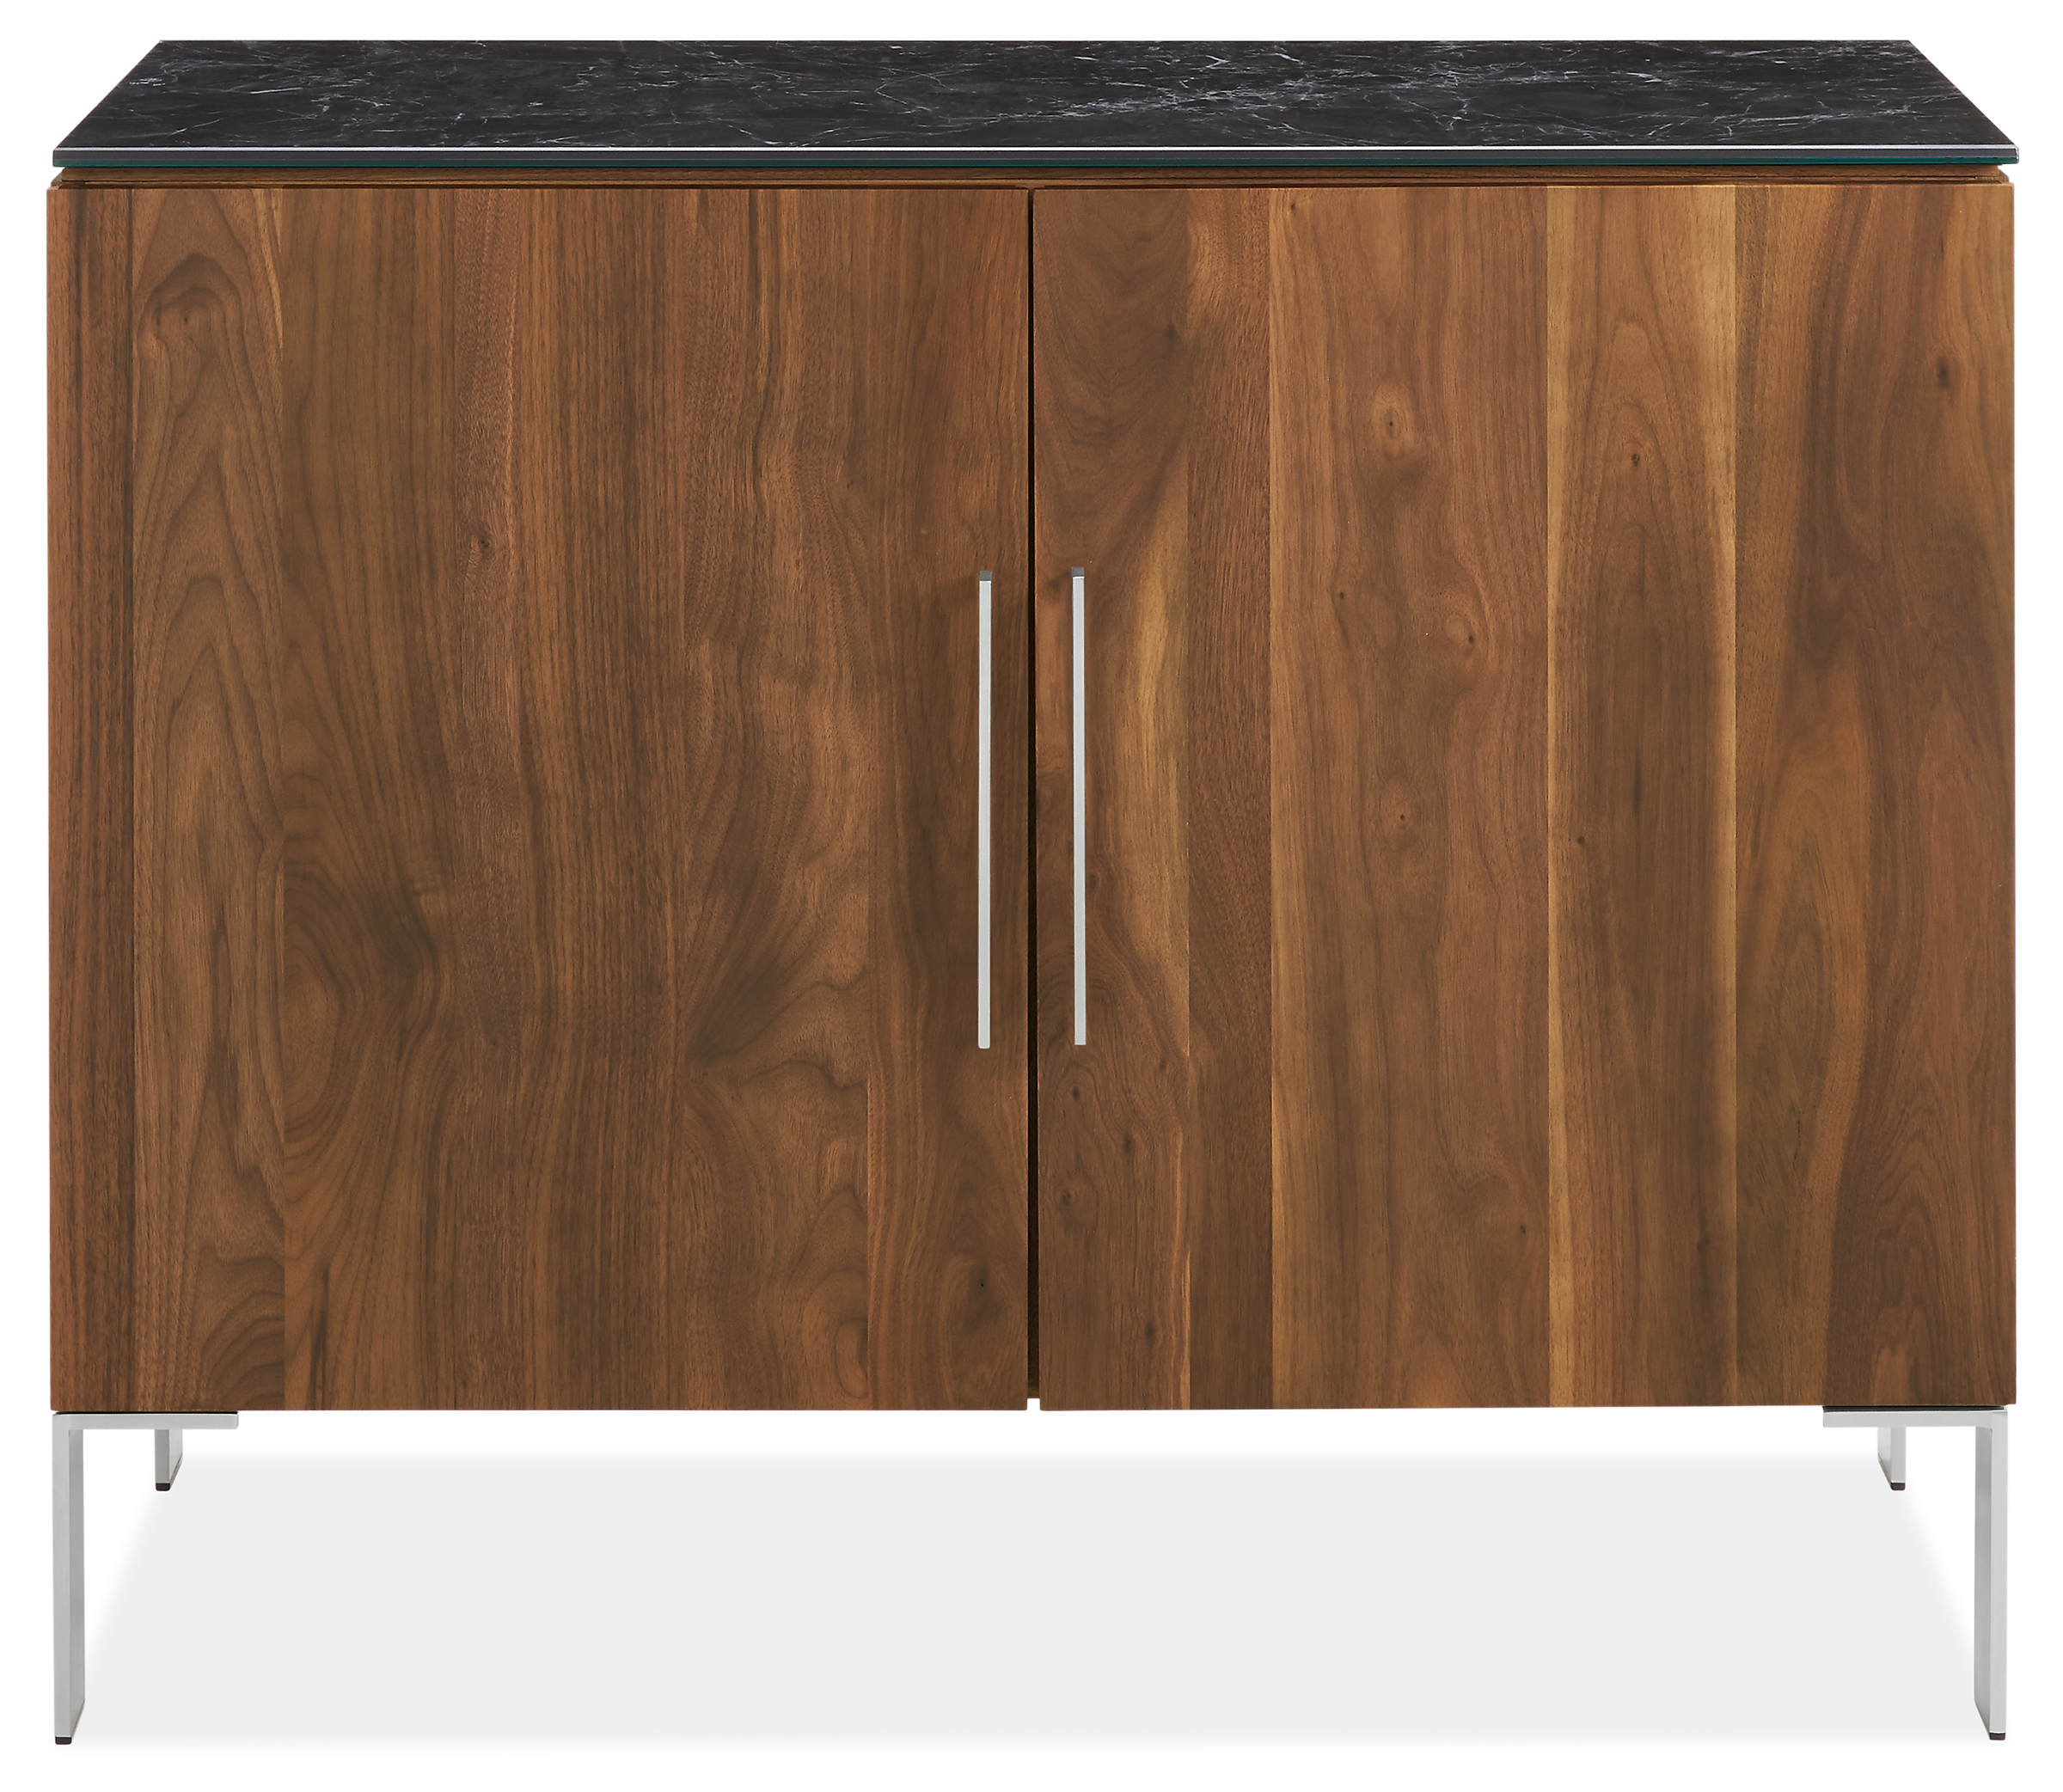 Kenwood 42w 20d 35h Storage Cabinet with Ceramic Top